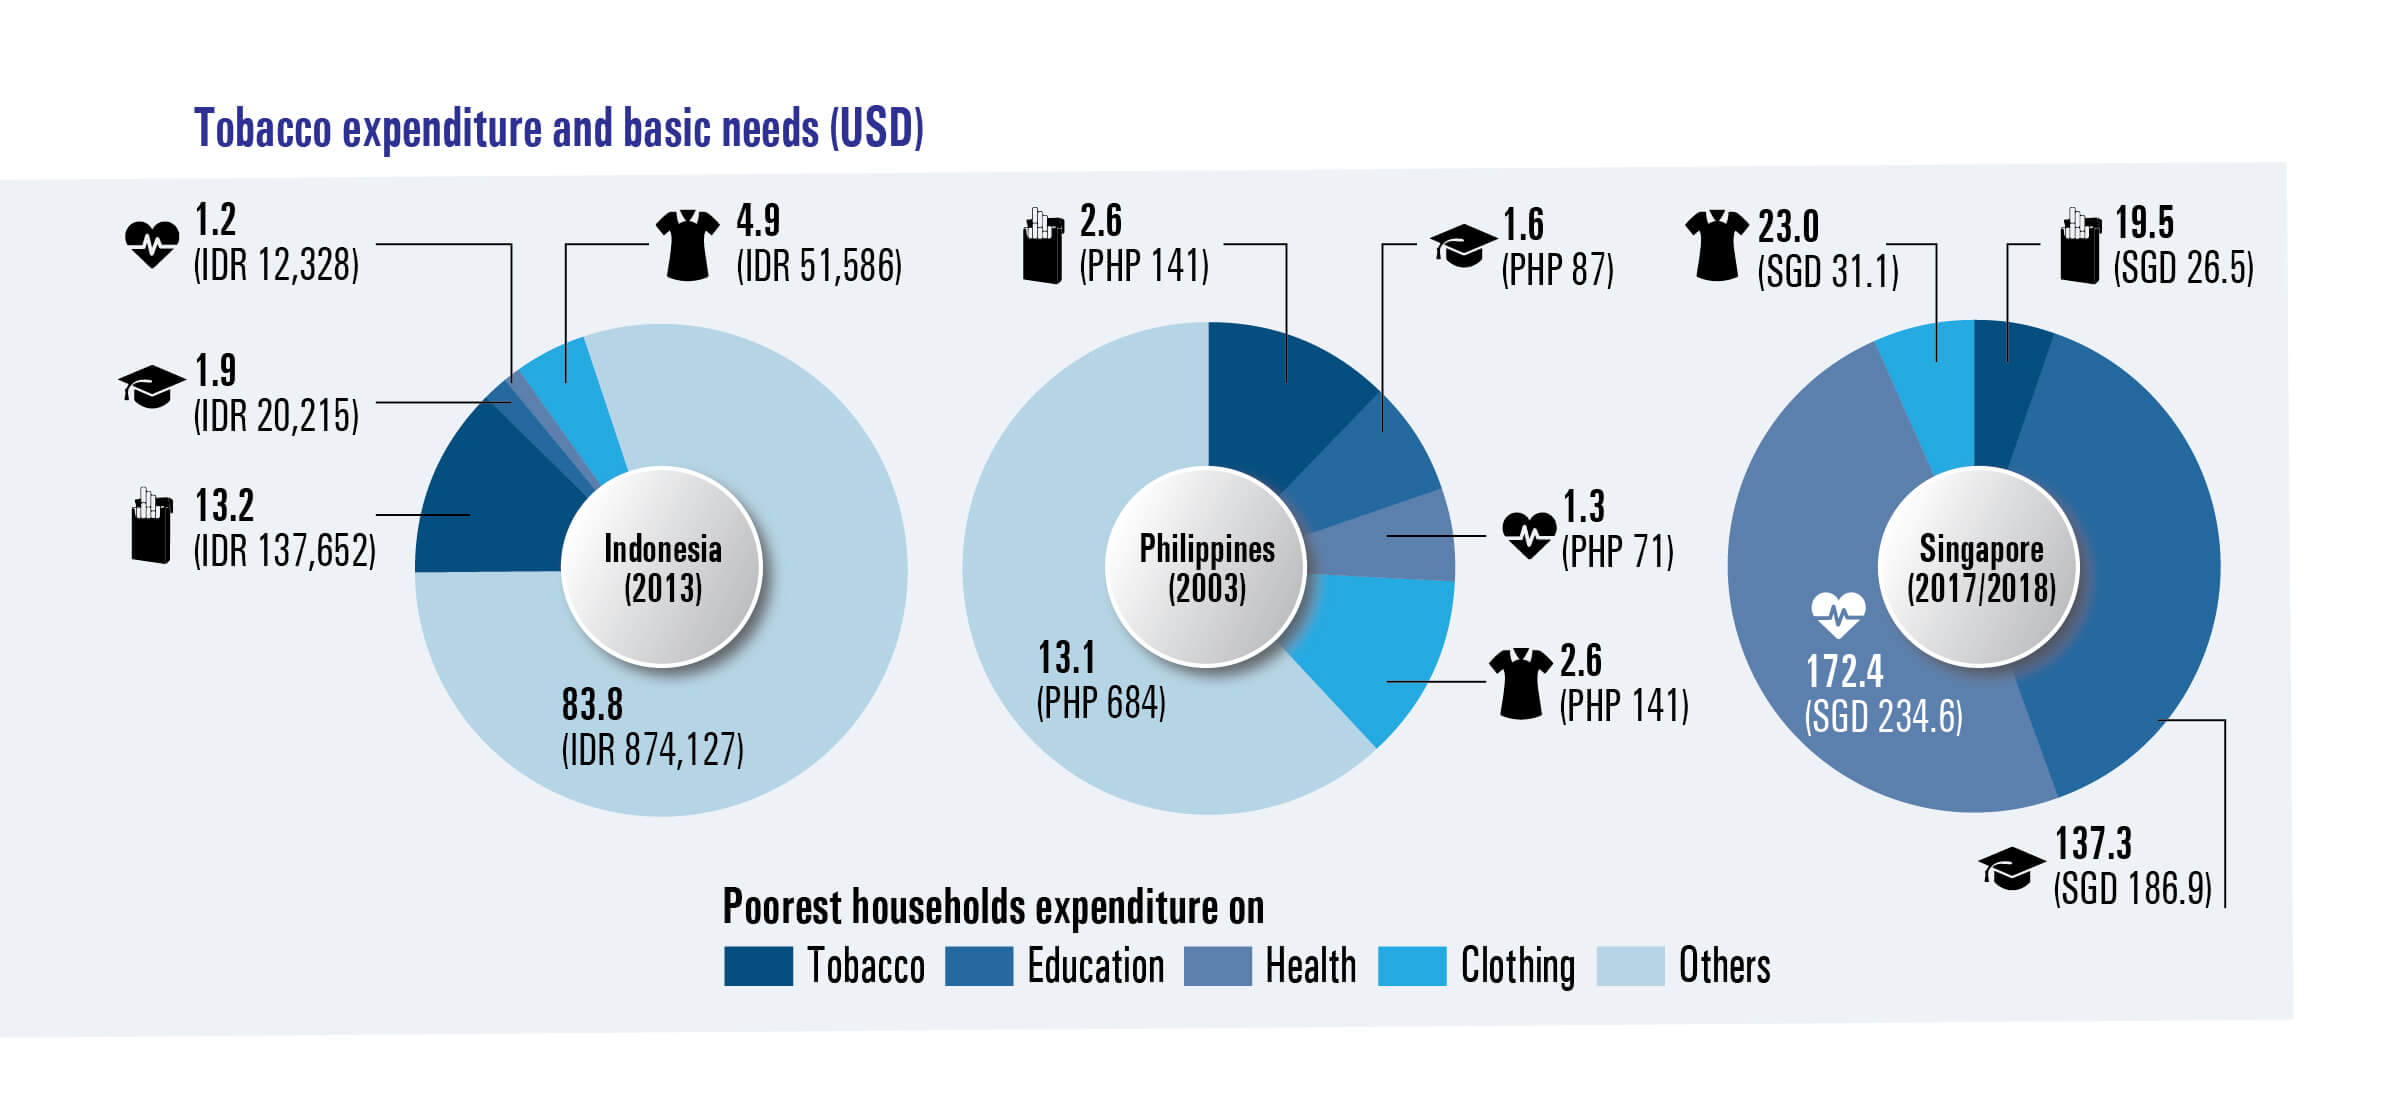 Tobacco expenditure and basic needs (USD)